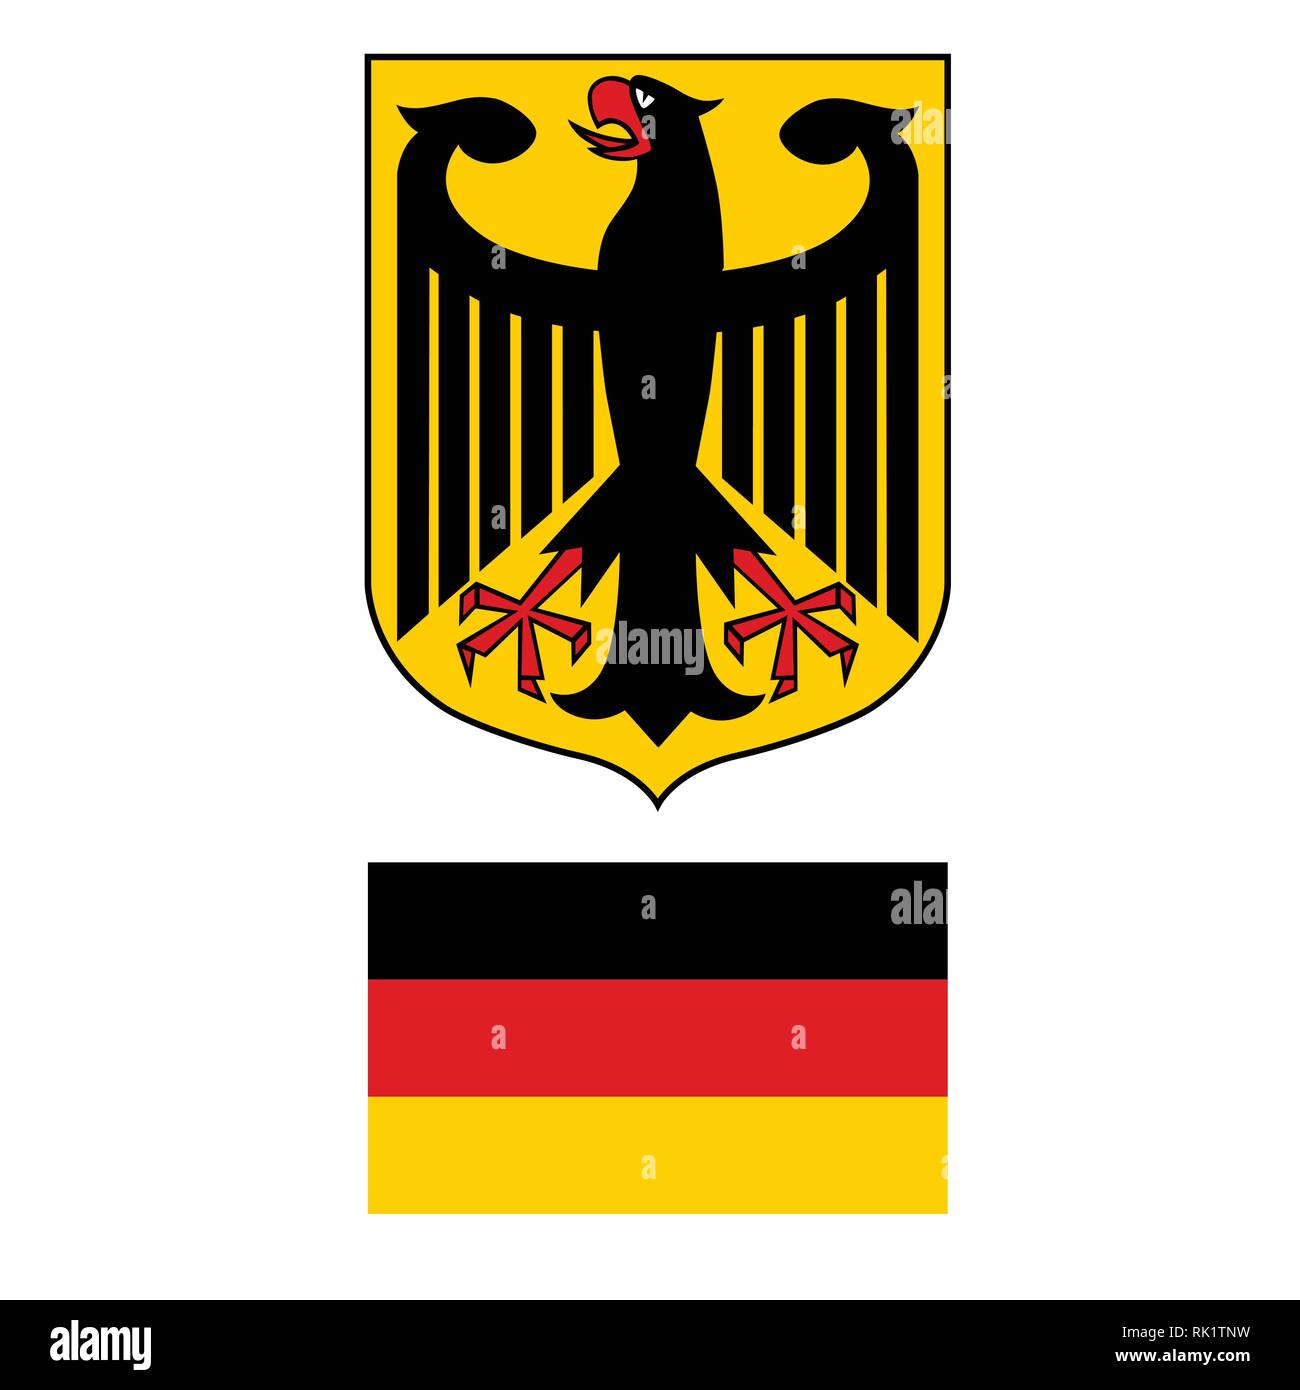 Coat of Arms SHIELD Germanys Flag Colors Black Red Yellow & Cross